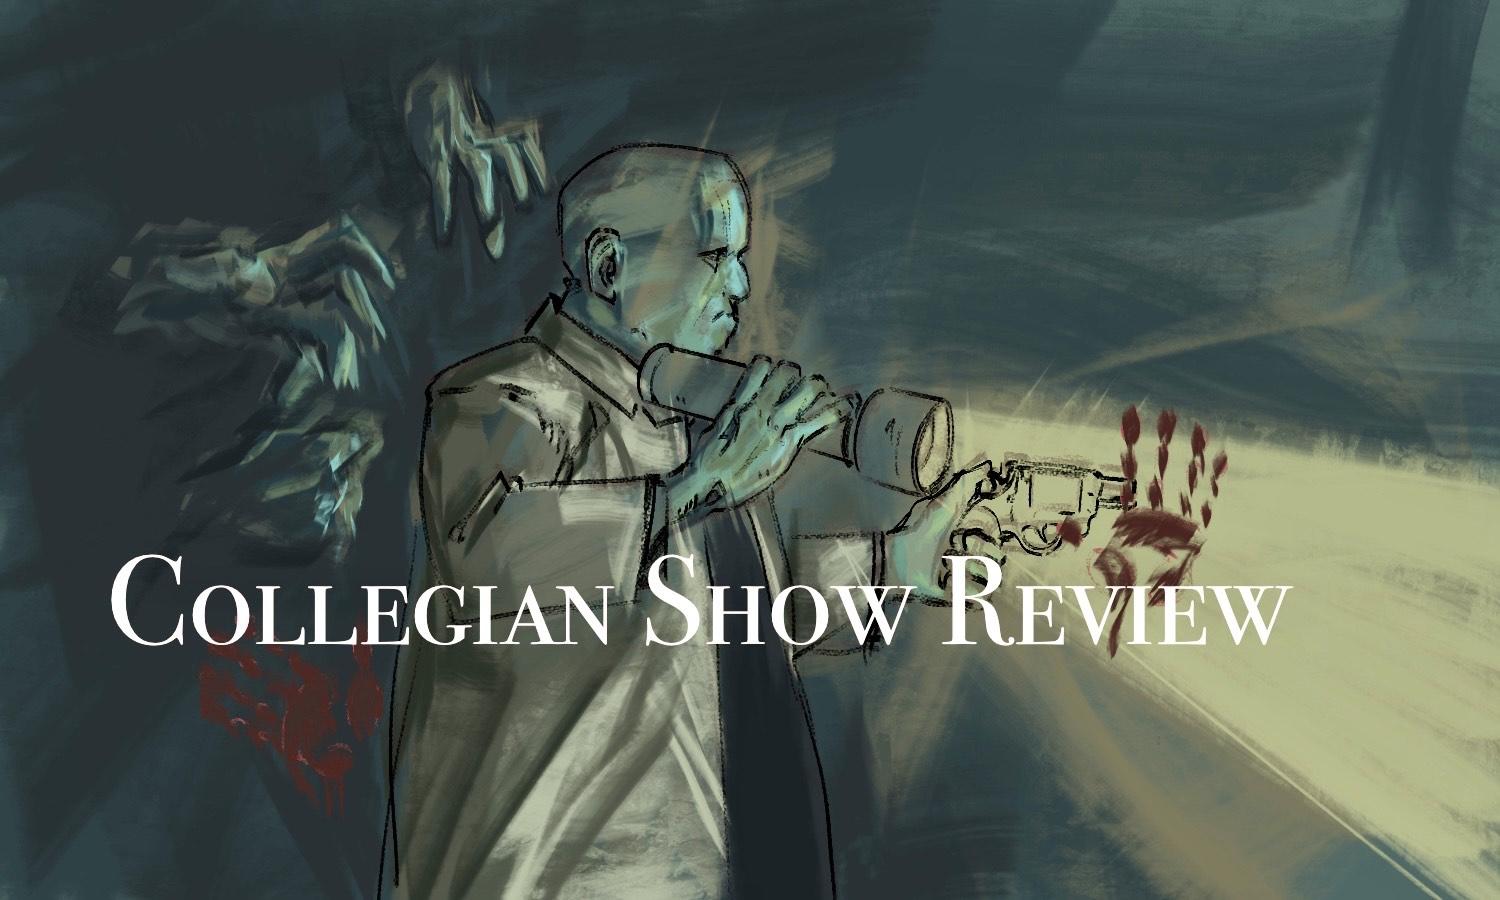 Illustration of a detective holding a flashlight and a gun. Behind him is a wall with a bloody finger print on it. The text "Collegian Show Review" is on the illustration